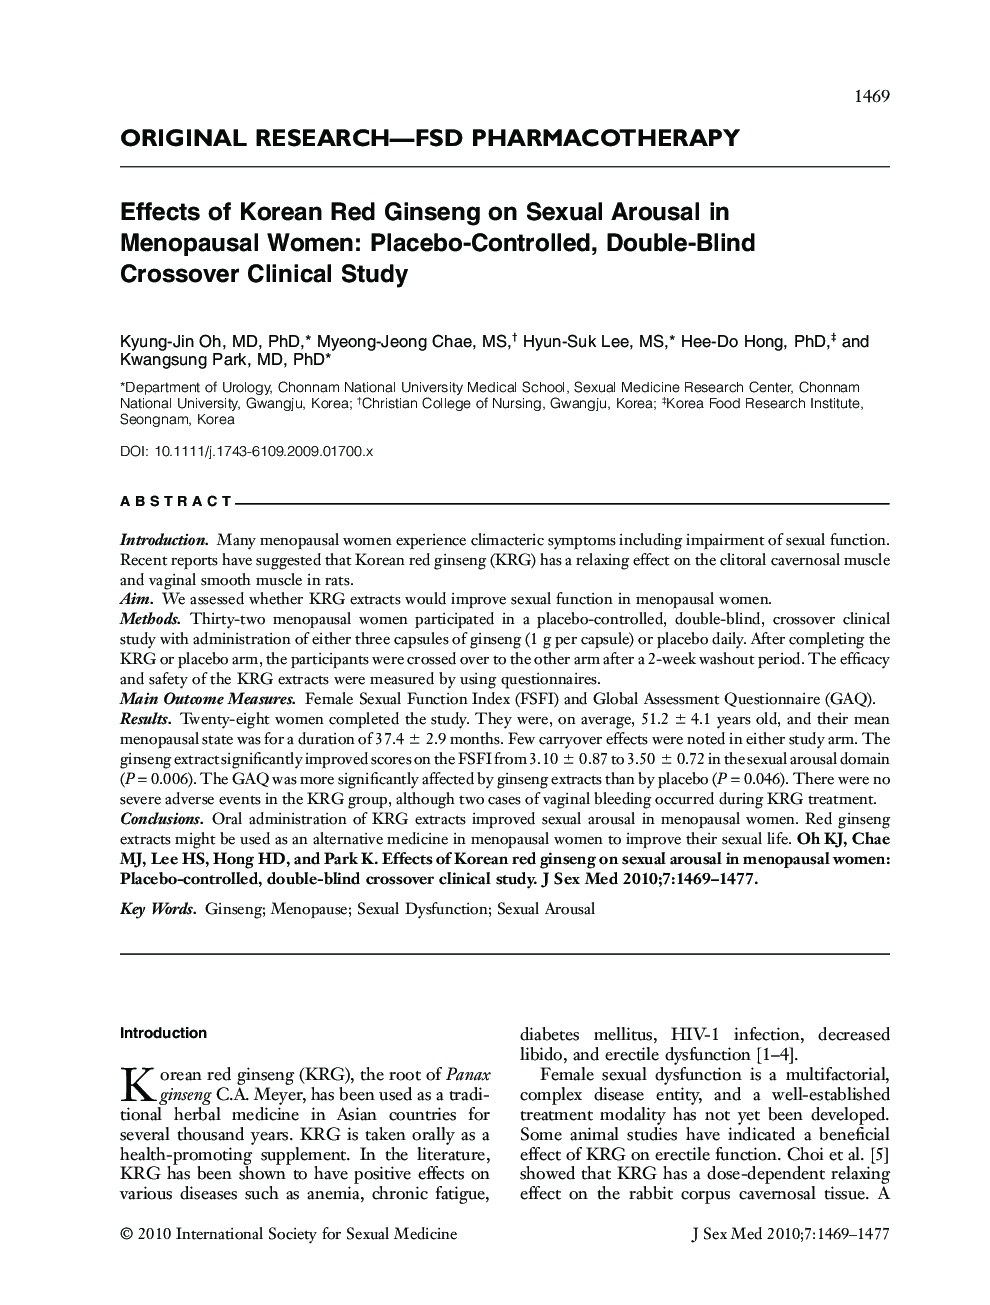 Effects of Korean Red Ginseng on Sexual Arousal in Menopausal Women: Placebo-Controlled, Double-Blind Crossover Clinical Study